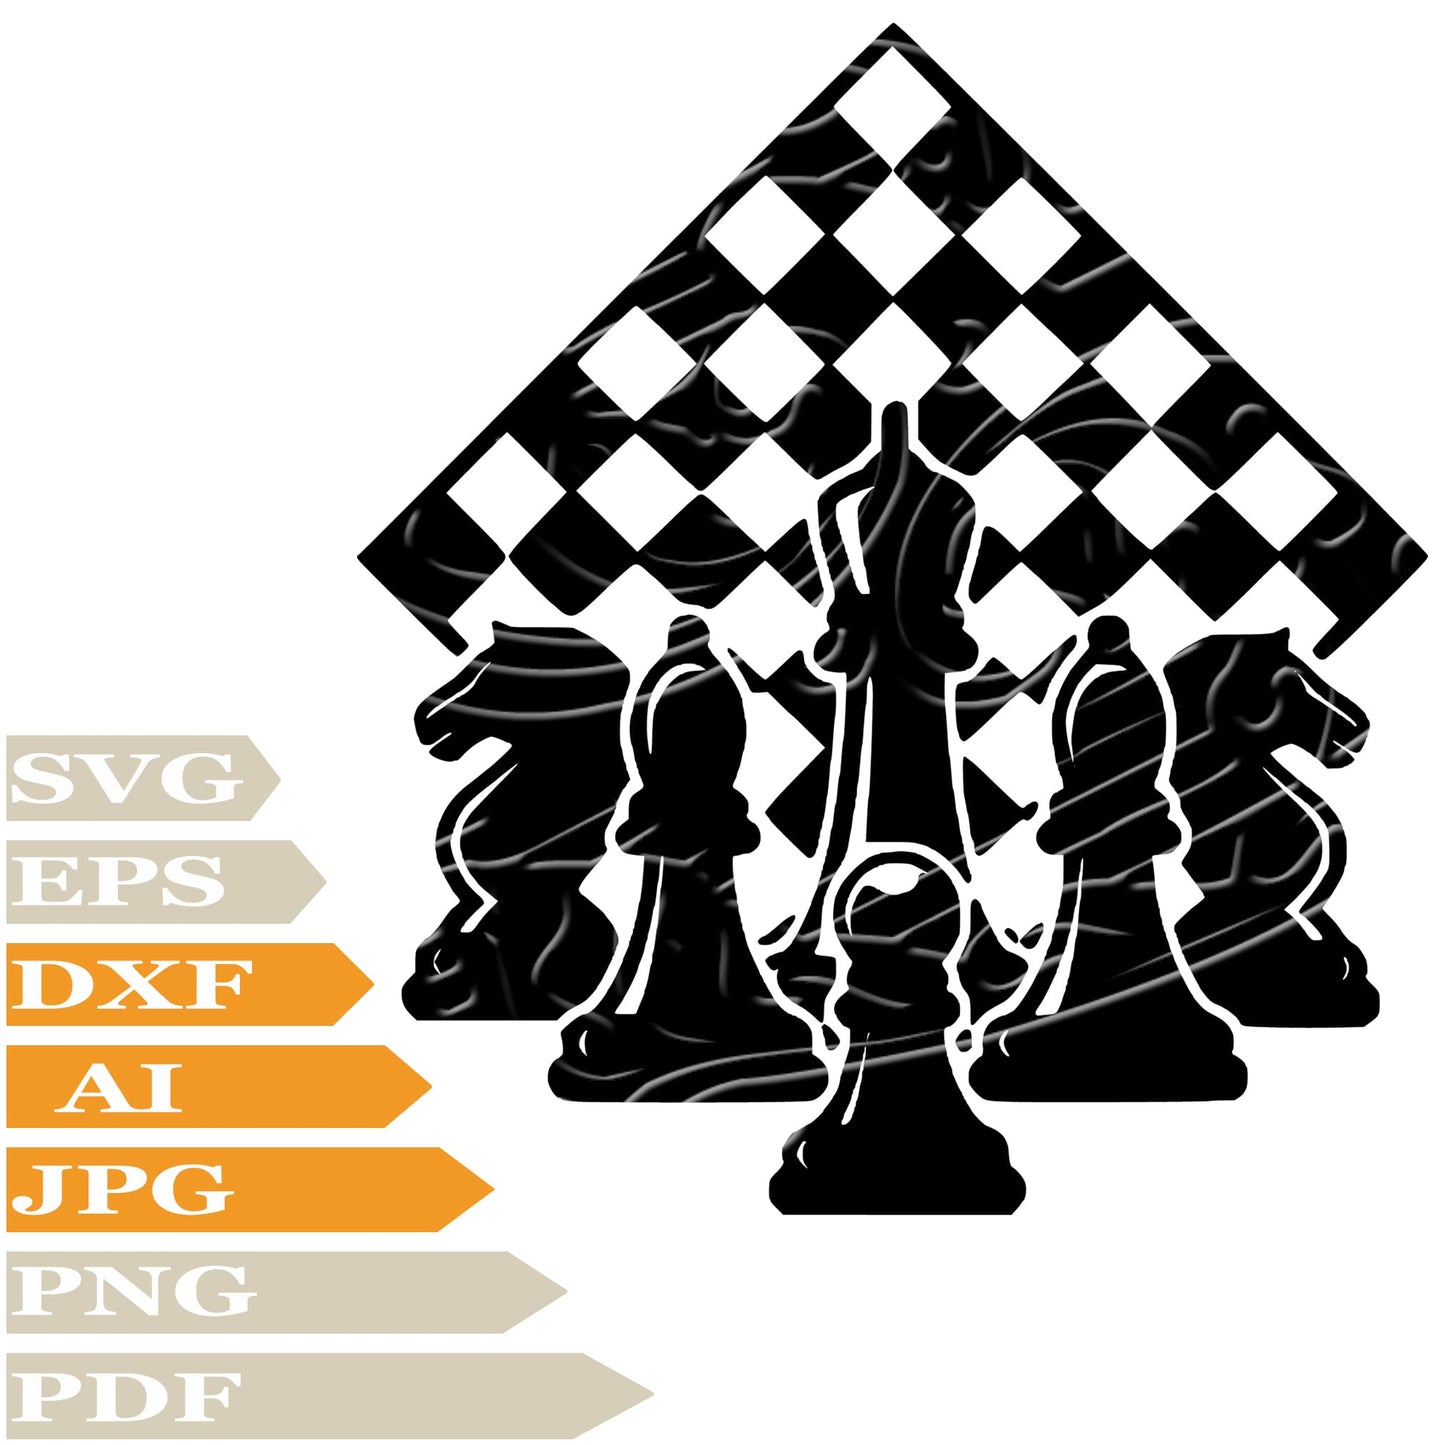 Chess, Board With Chess Pieces Svg File, Image Cut, Png, For Tattoo, Silhouette, Digital Vector Download, Cut File, Clipart, For Cricut